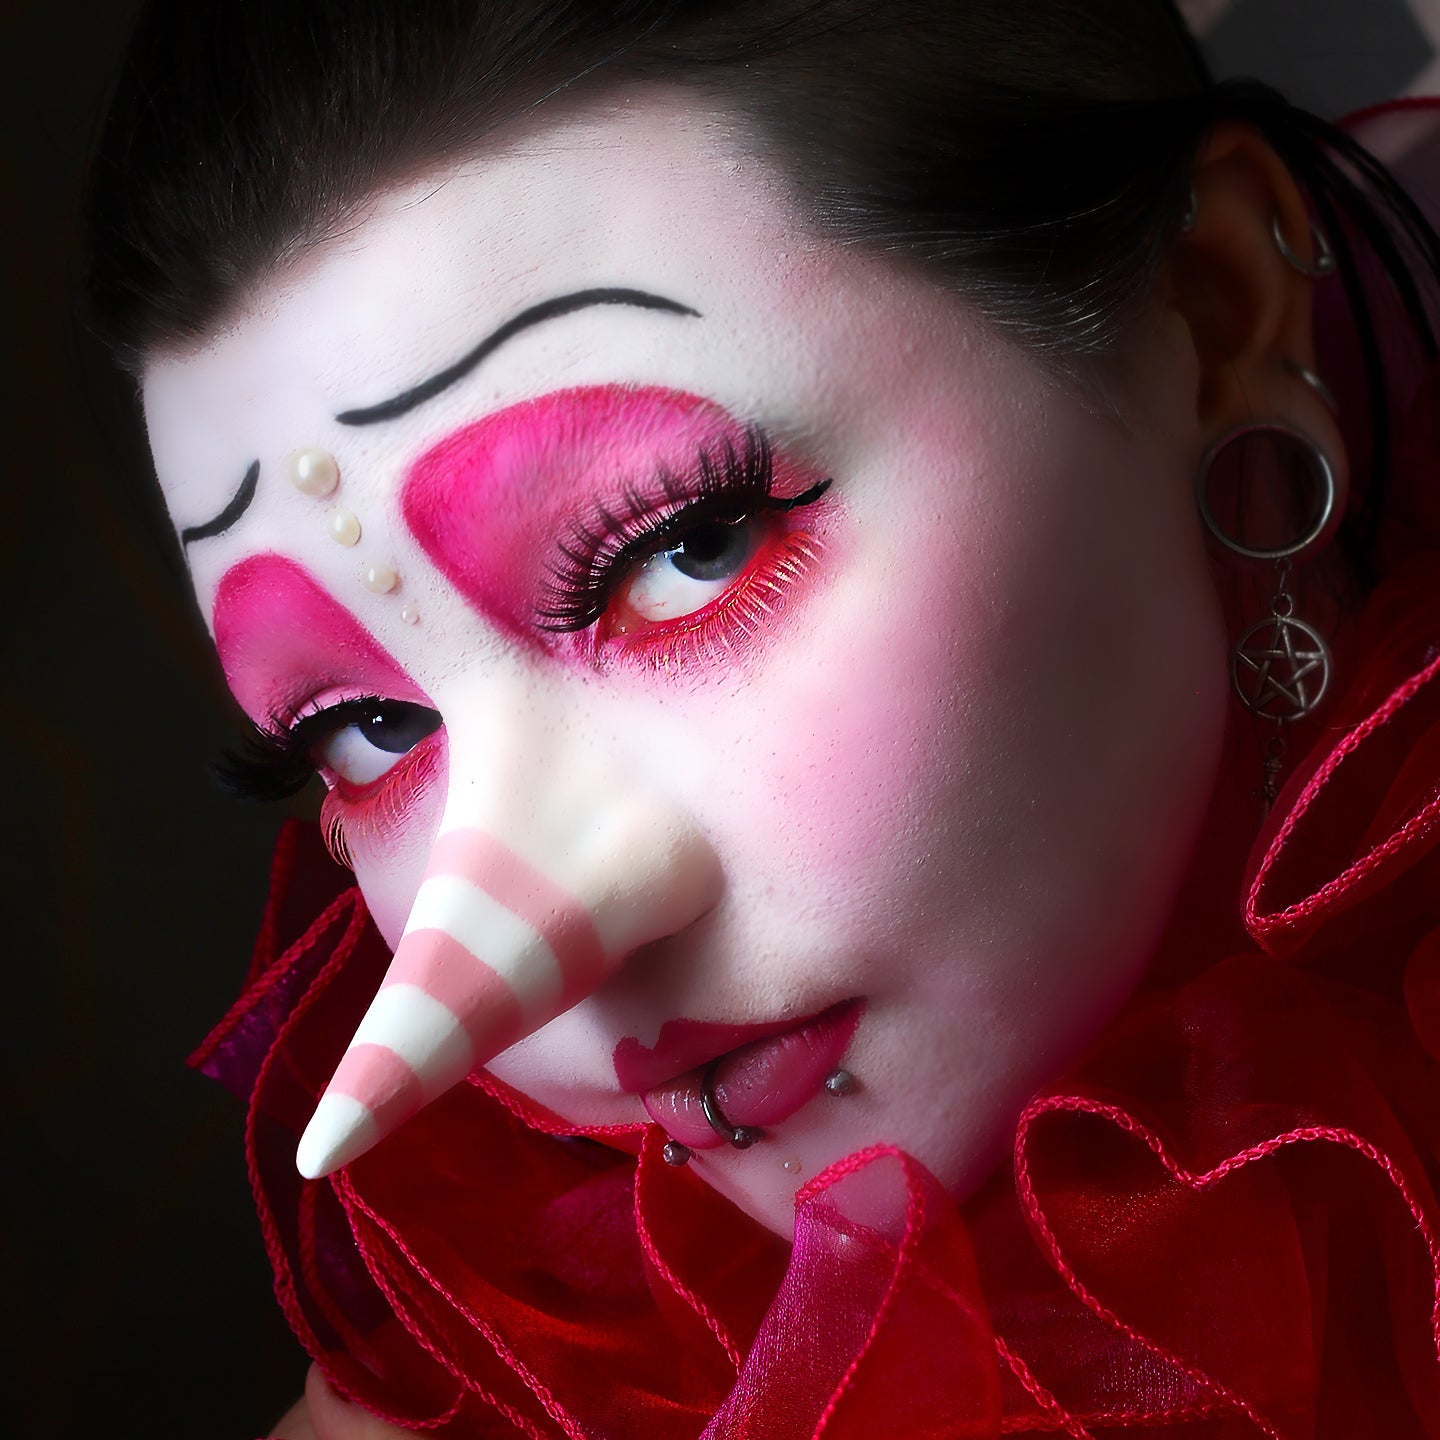 Woman in pink clown makeup, wearing a long nose prosthetic